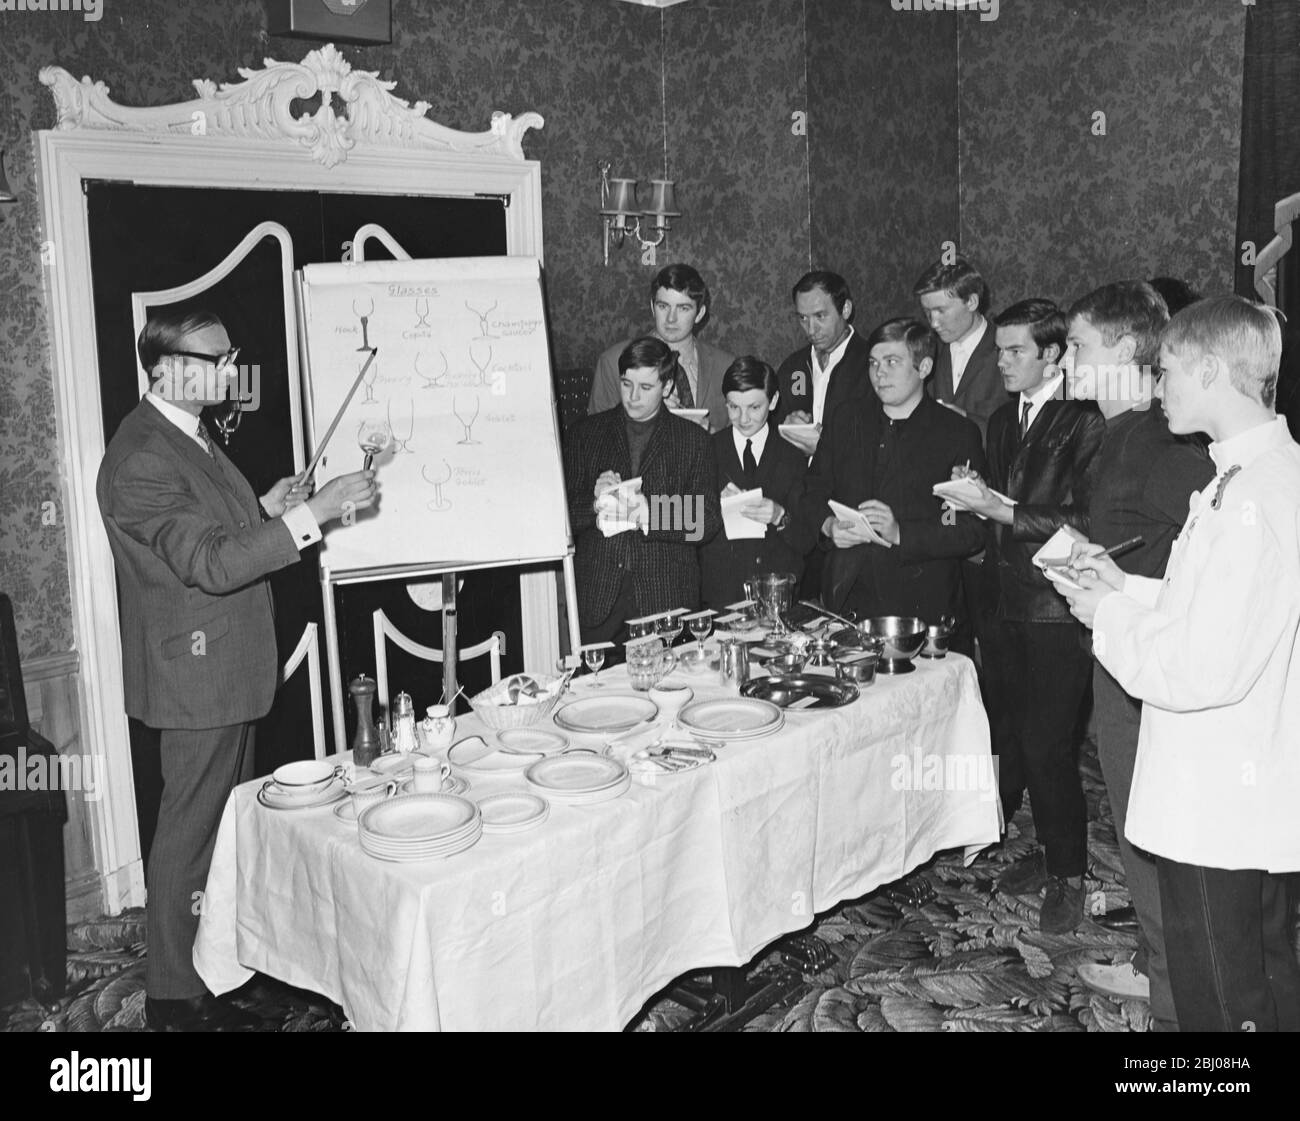 A course has been set up by The Hotel and Catering Industry Training Board to train waiters. Here supervisor Brian Saword lectures to the class of trainee waiters on the different types of glasses. - London, England. - 22 May 1968 Stock Photo